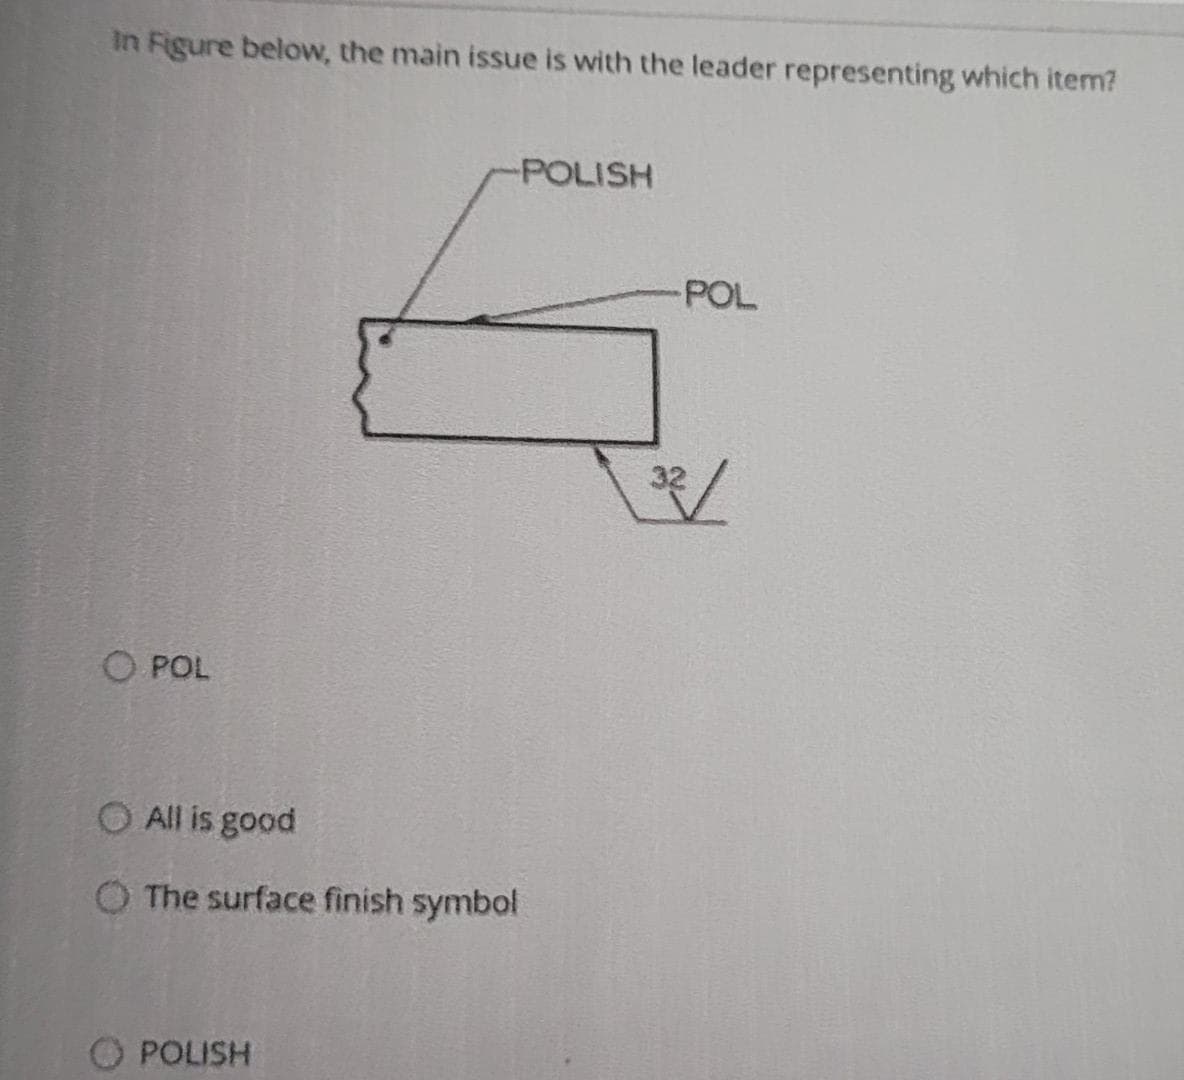 In Figure below, the main issue is with the leader representing which item?
-POLISH
POL
32
O POL
O All is good
The surface finish symbol
POLISH
